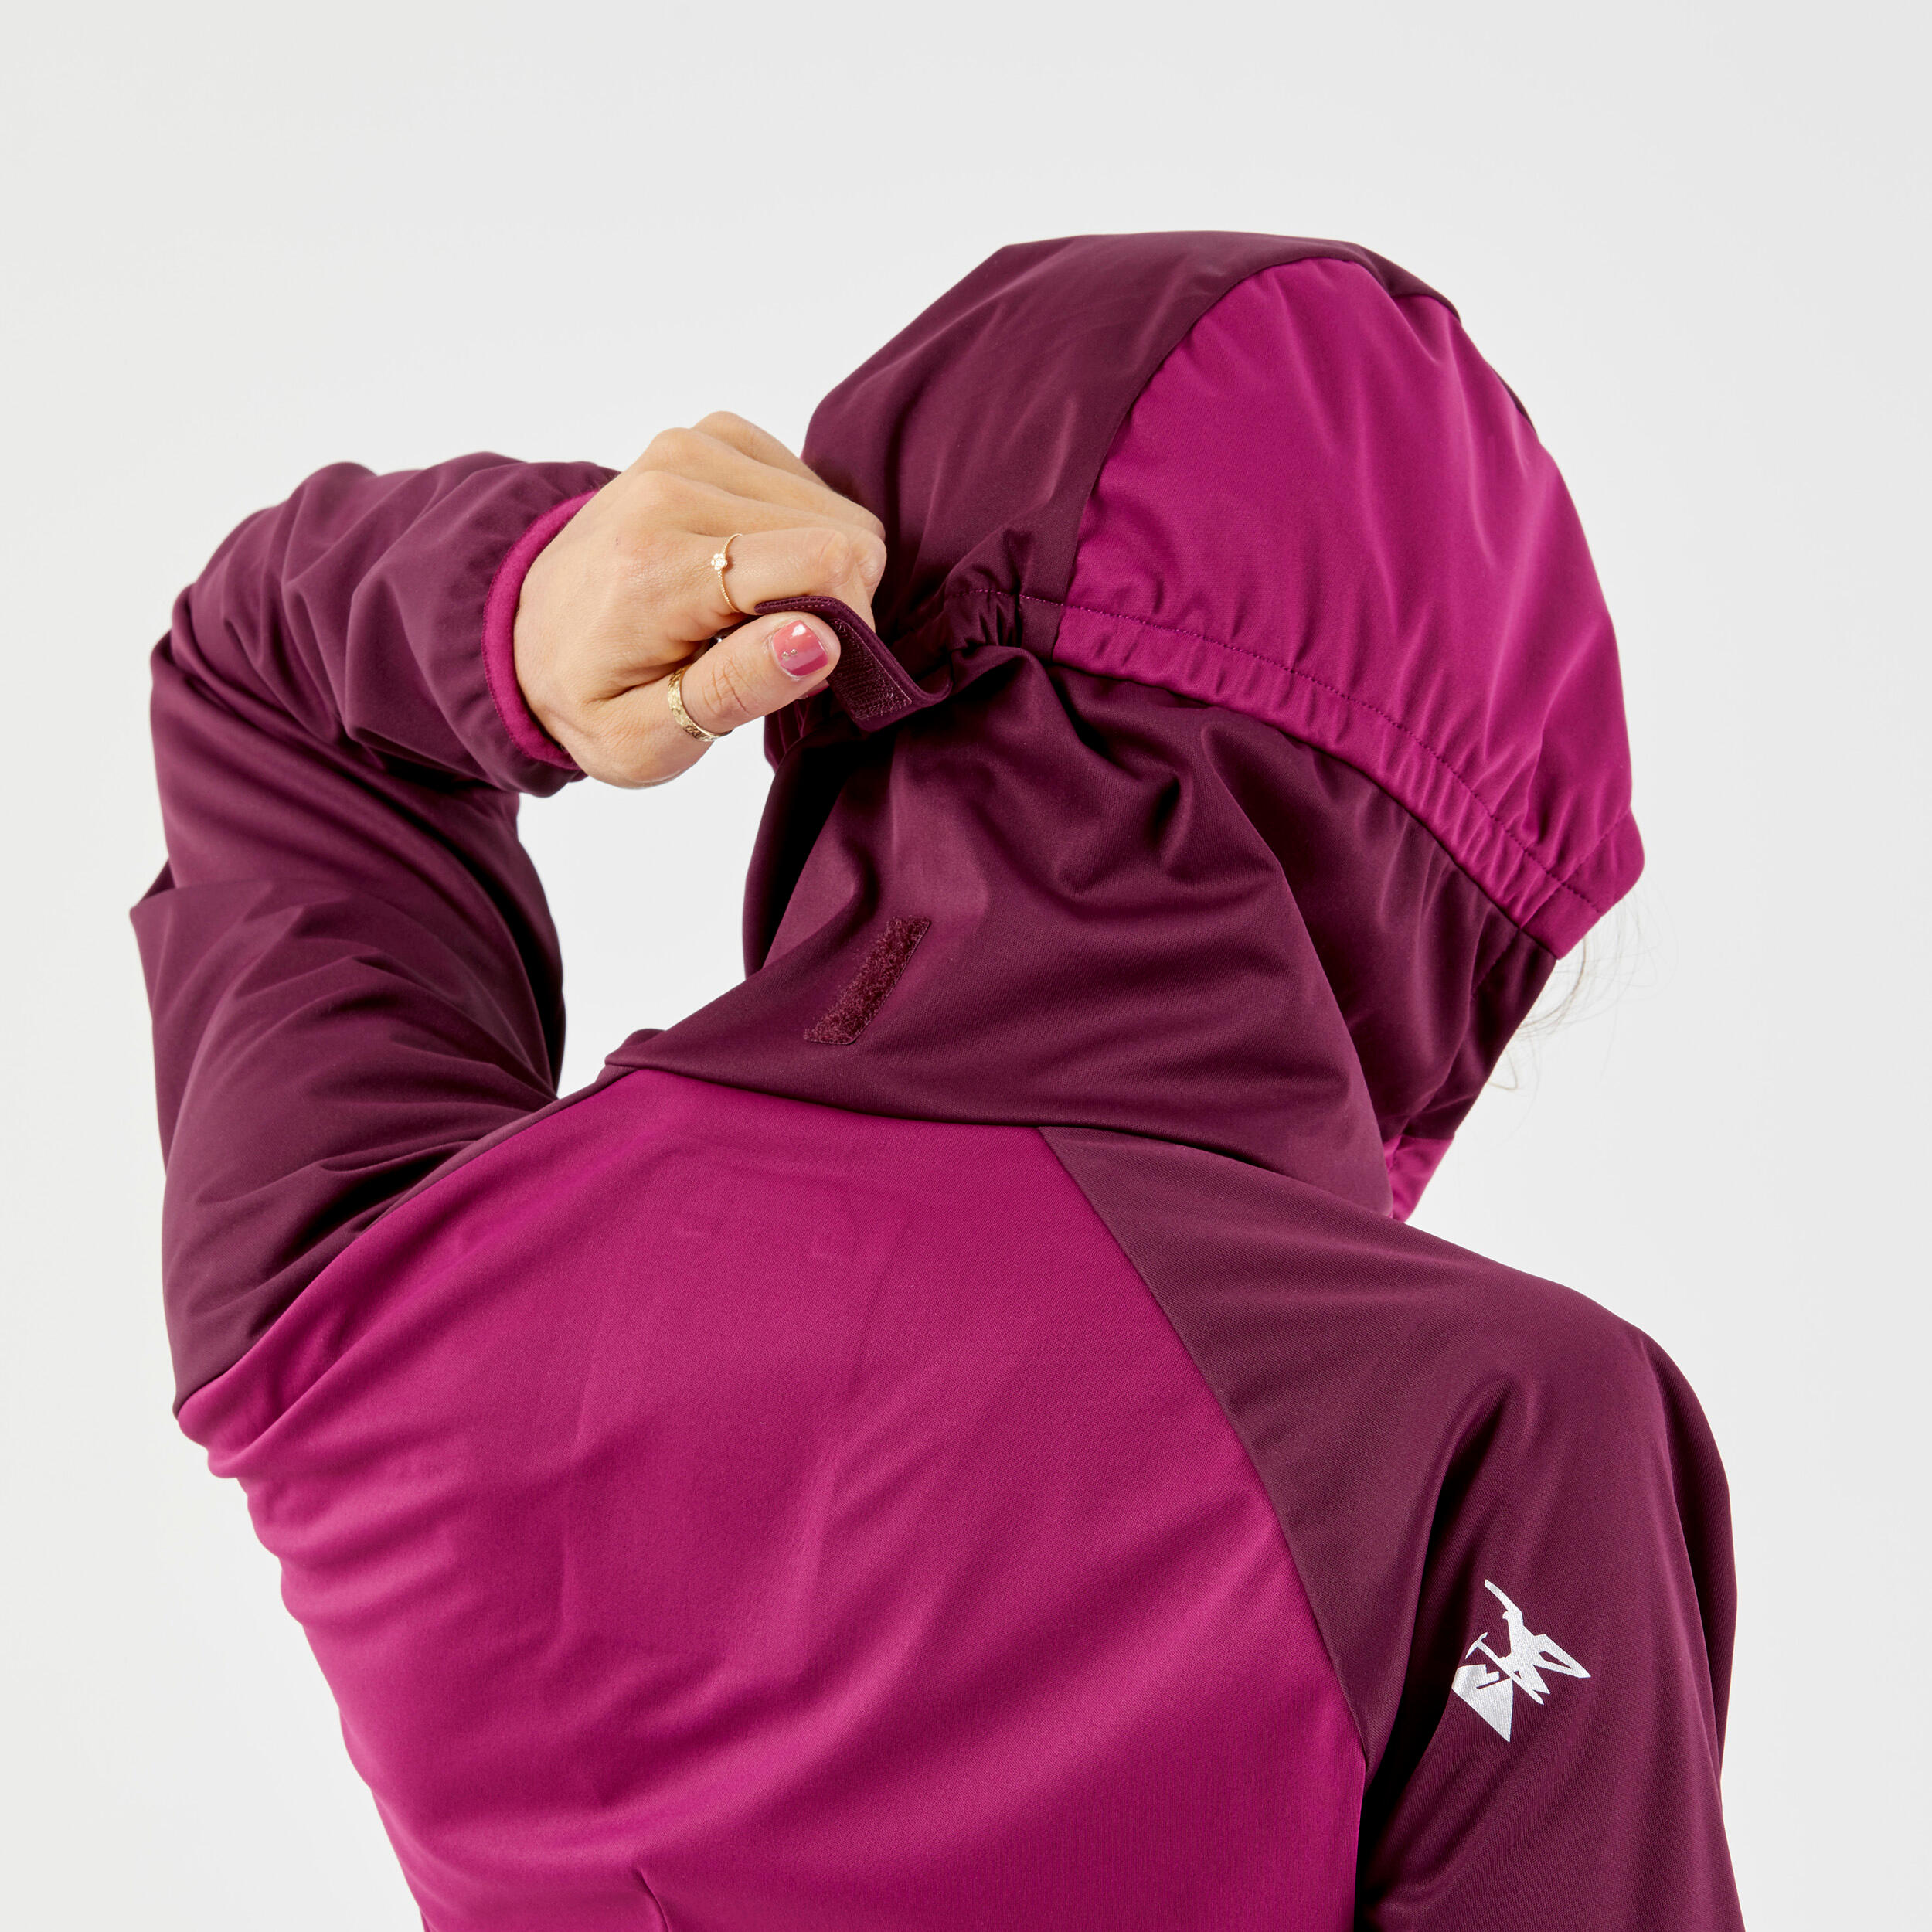 WOMEN'S MOUNTAINEERING SOFTSHELL JACKET - Beetroot Red 5/10